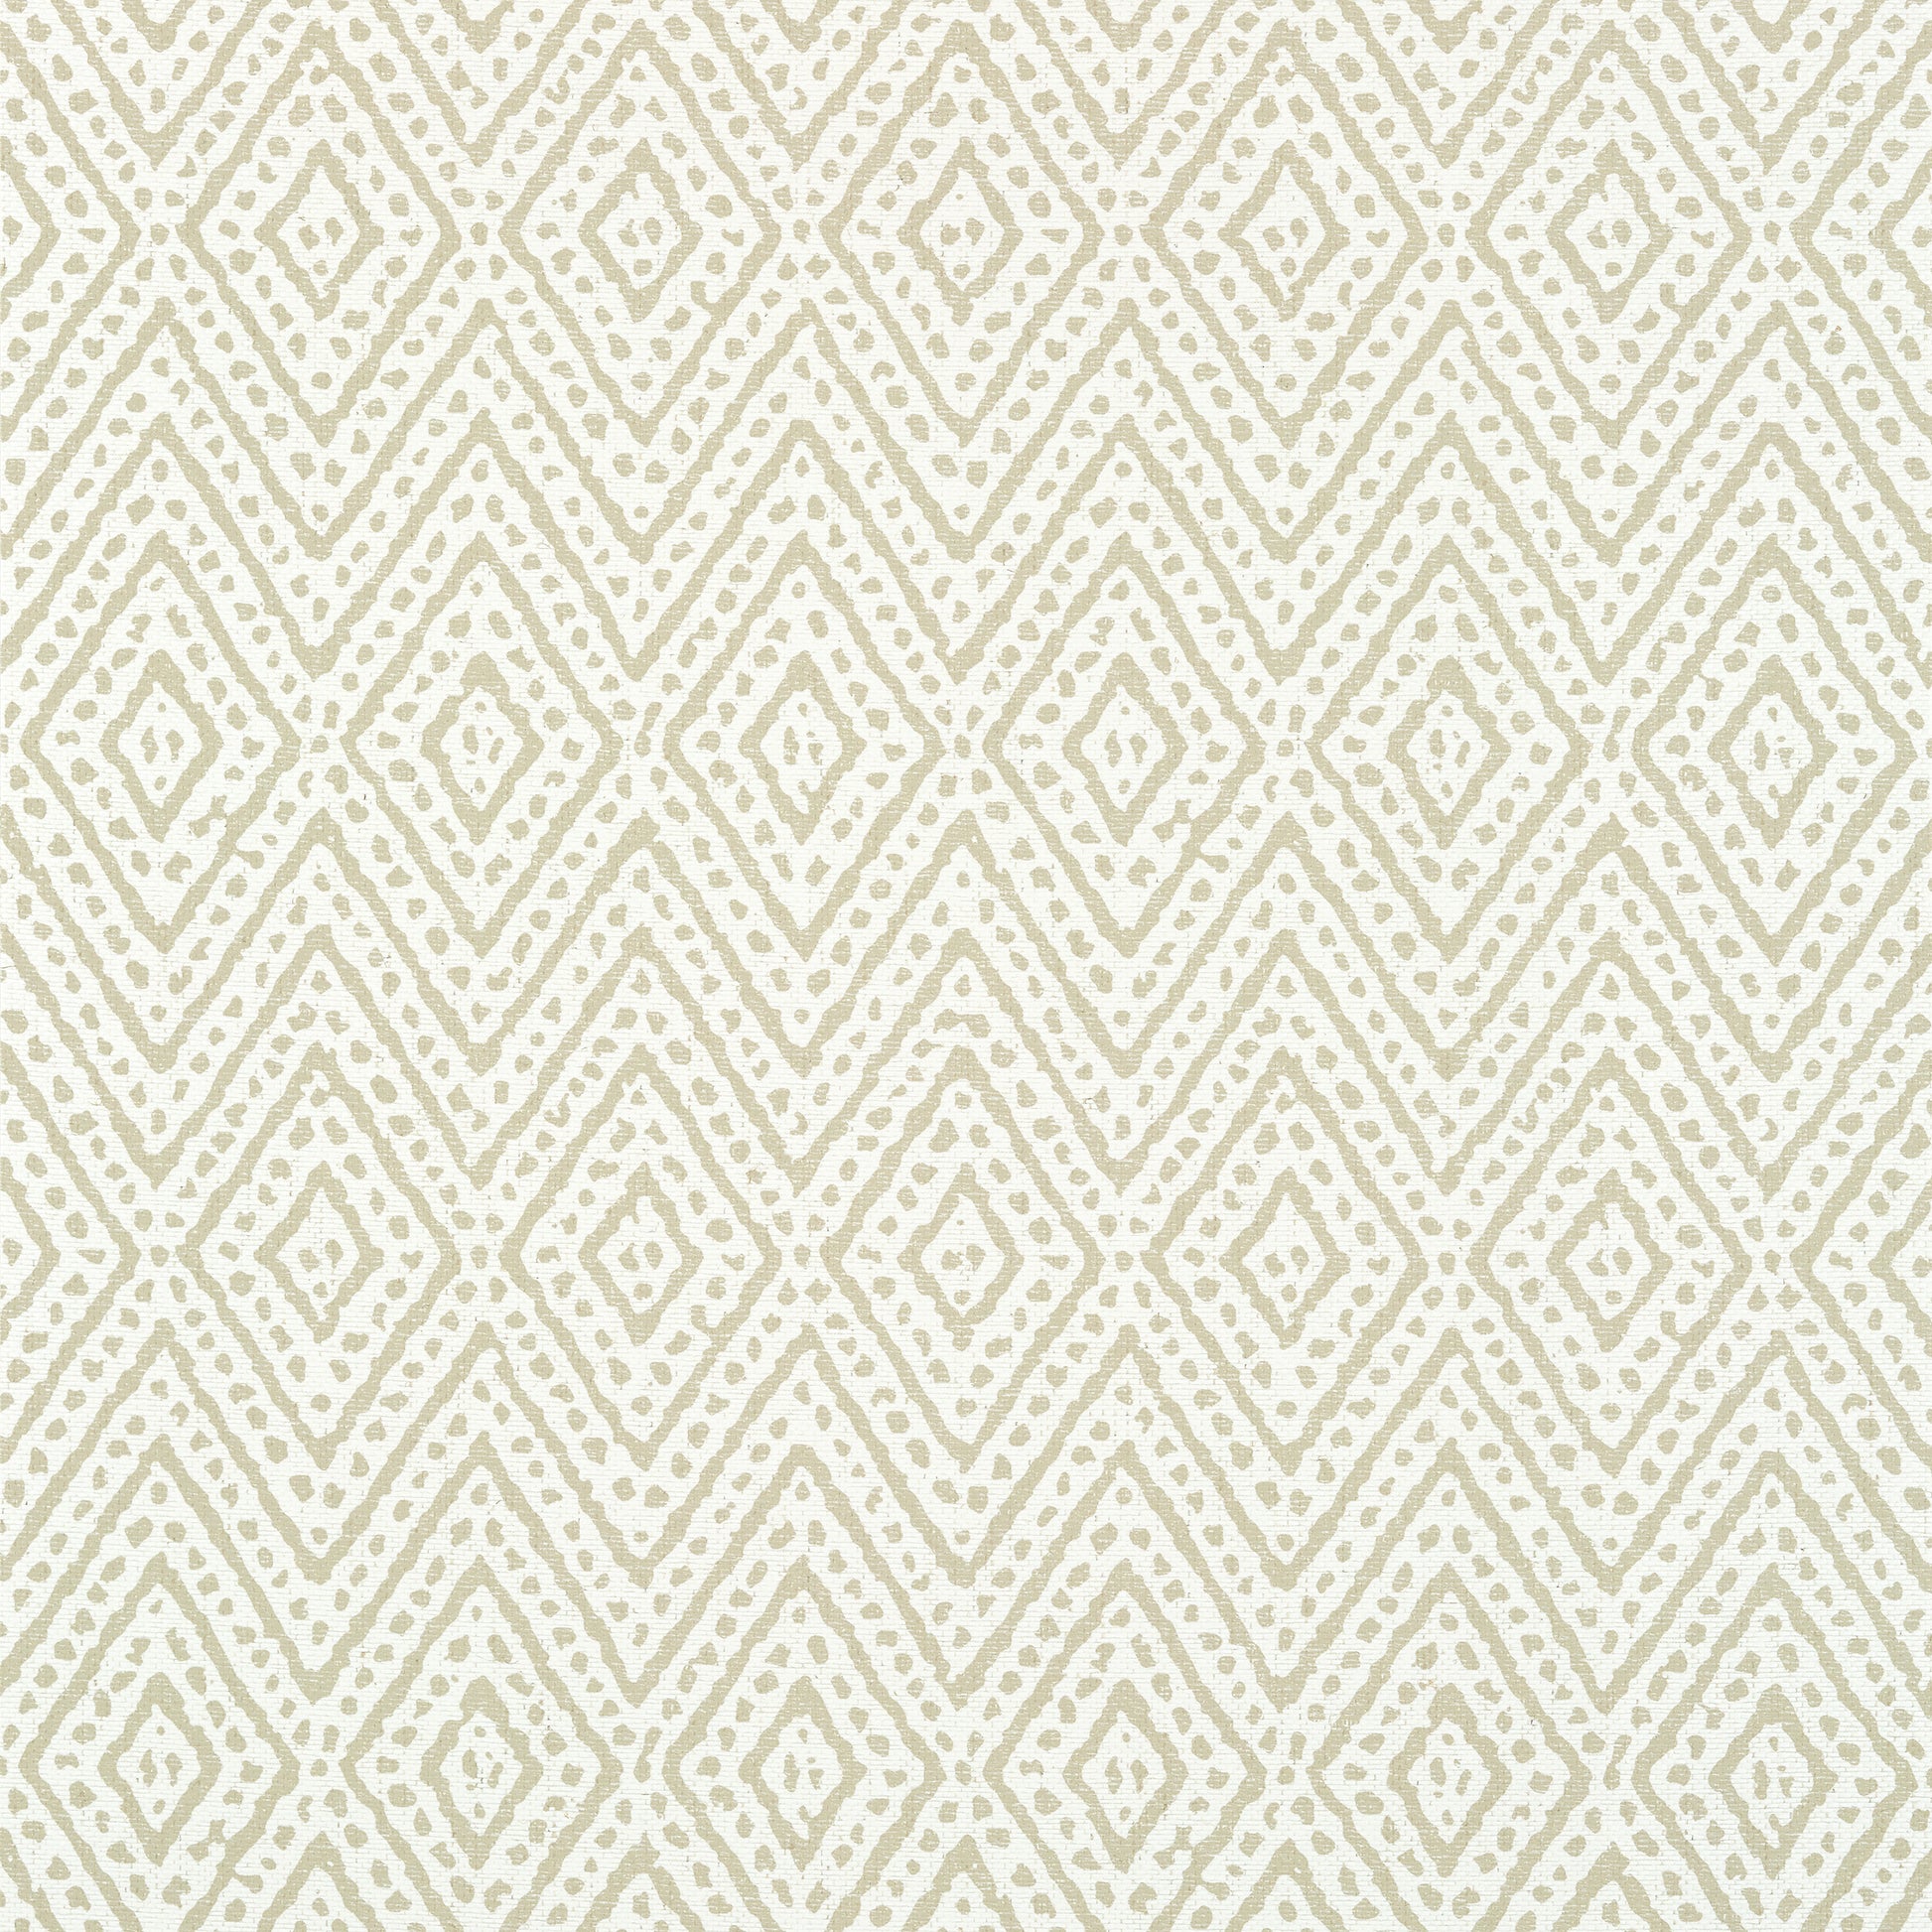 Purchase  Ann French Wallpaper Item AT78762 pattern name  Vero